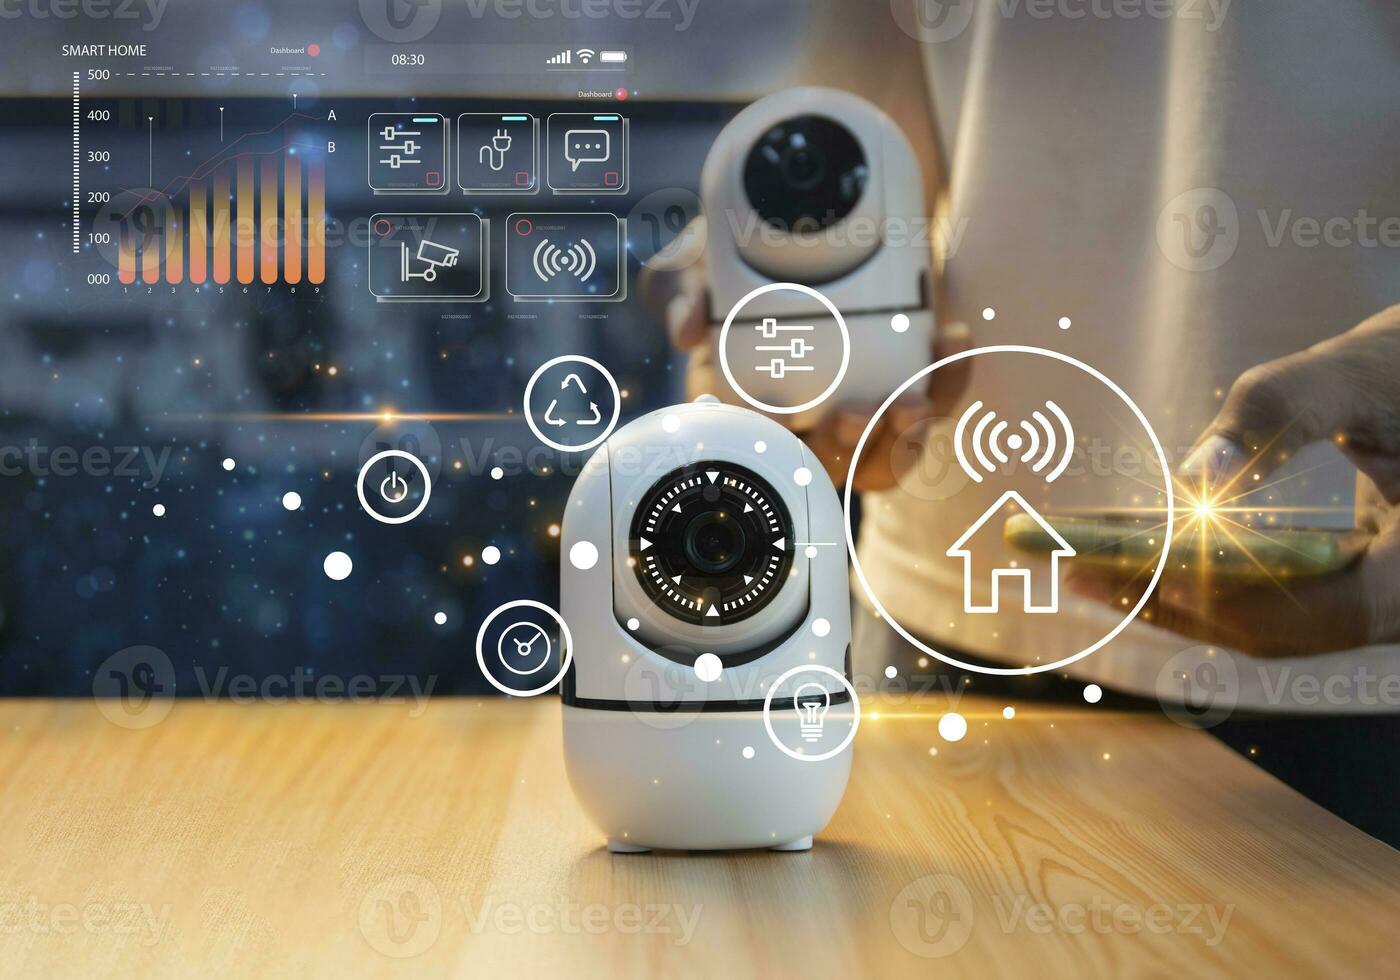 IP wifi wireless security camera supports Internet installation technology, security systems, smart home applications photo